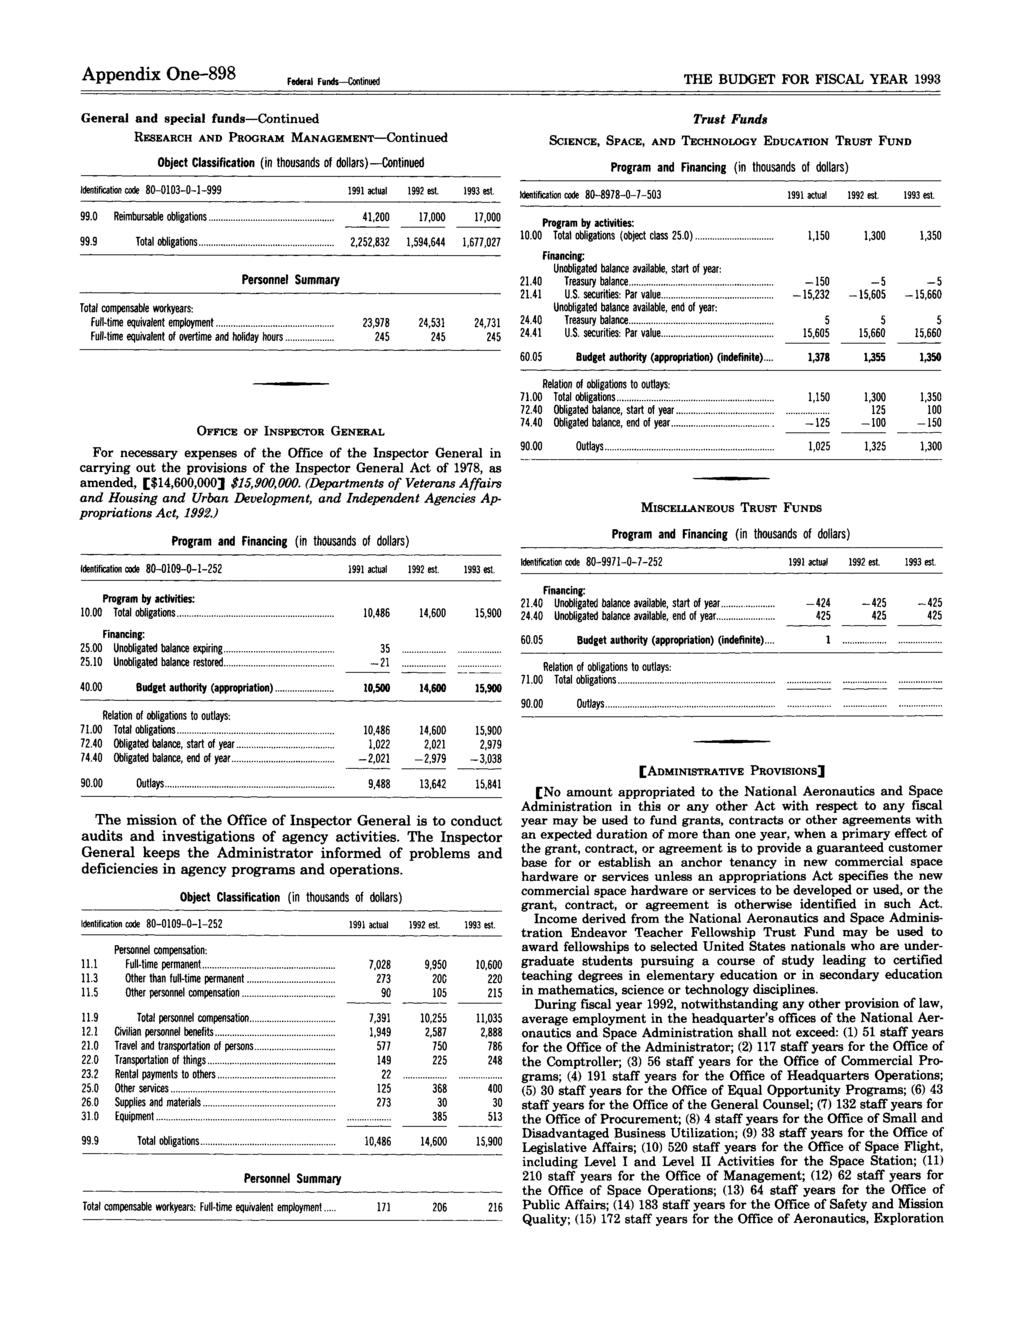 1993 Appendix One-898 THE BUDGET FOR FISCAL YEAR 1993 General and special funds Continued RESEARCH AND PROGRAM MANAGEMENT Continued Continued Identification code 8-13--1-999 1991 actual 1992 est.